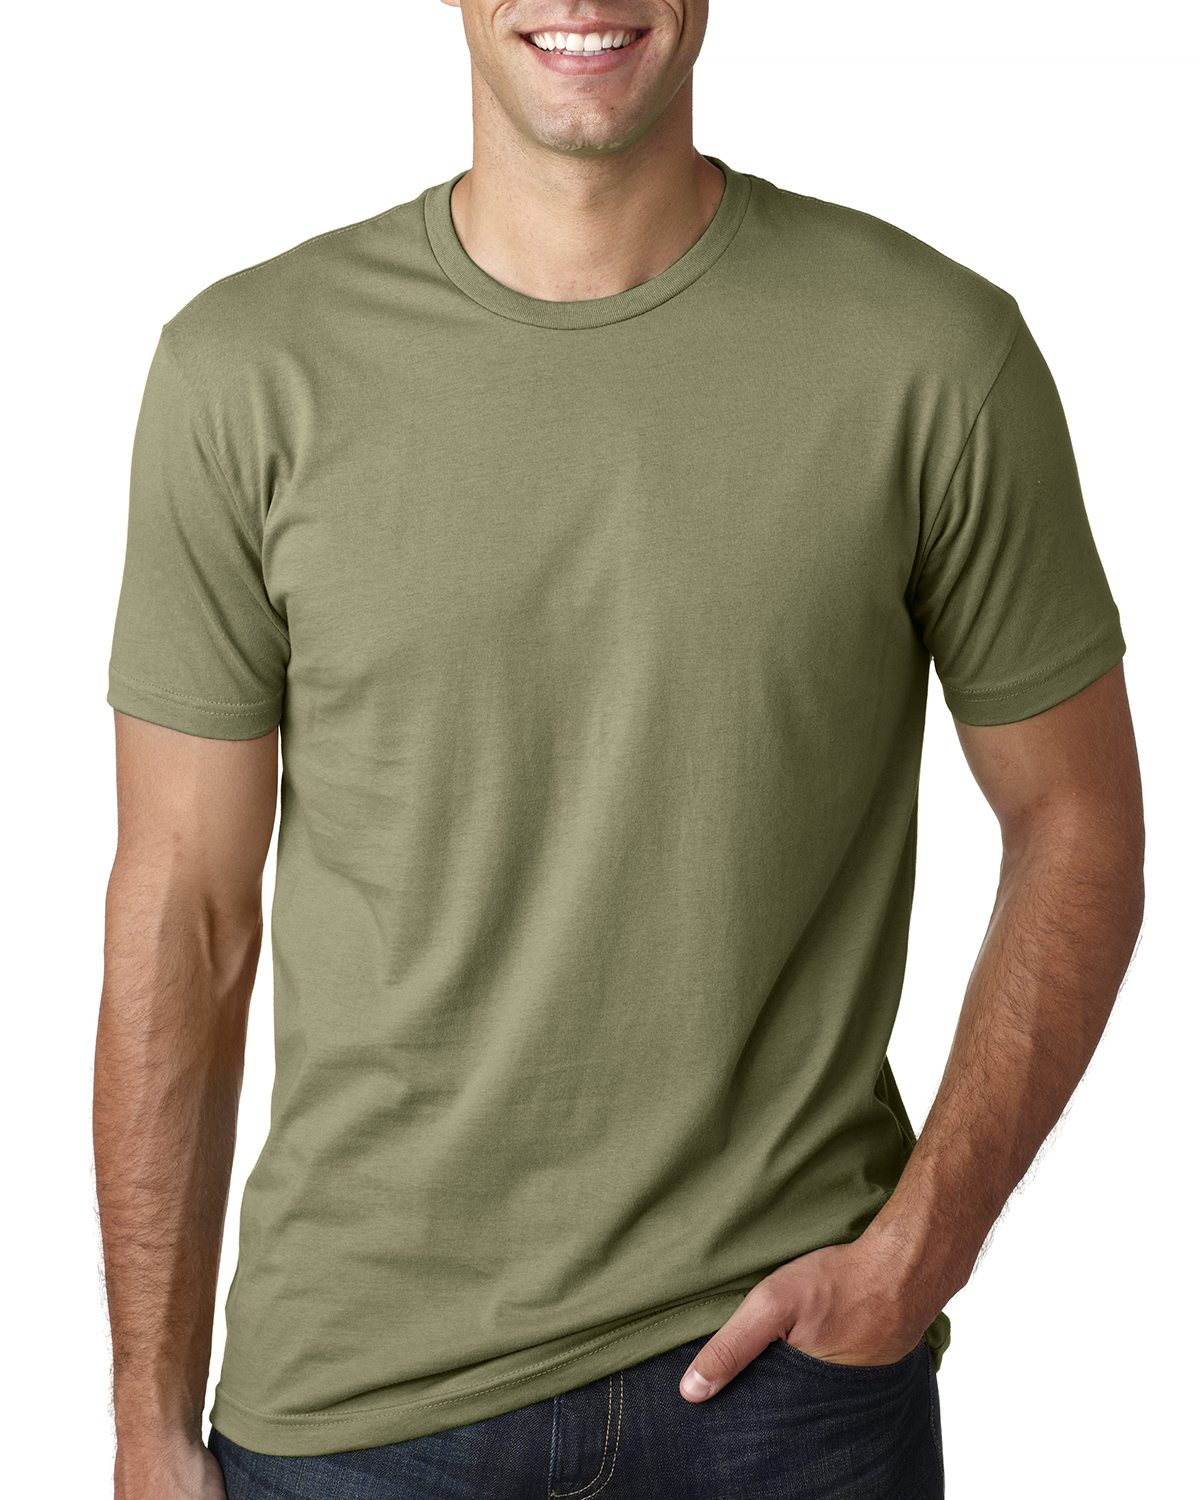 Department of redundancy Department funny OLIVE cotton t-shirt FN9318 